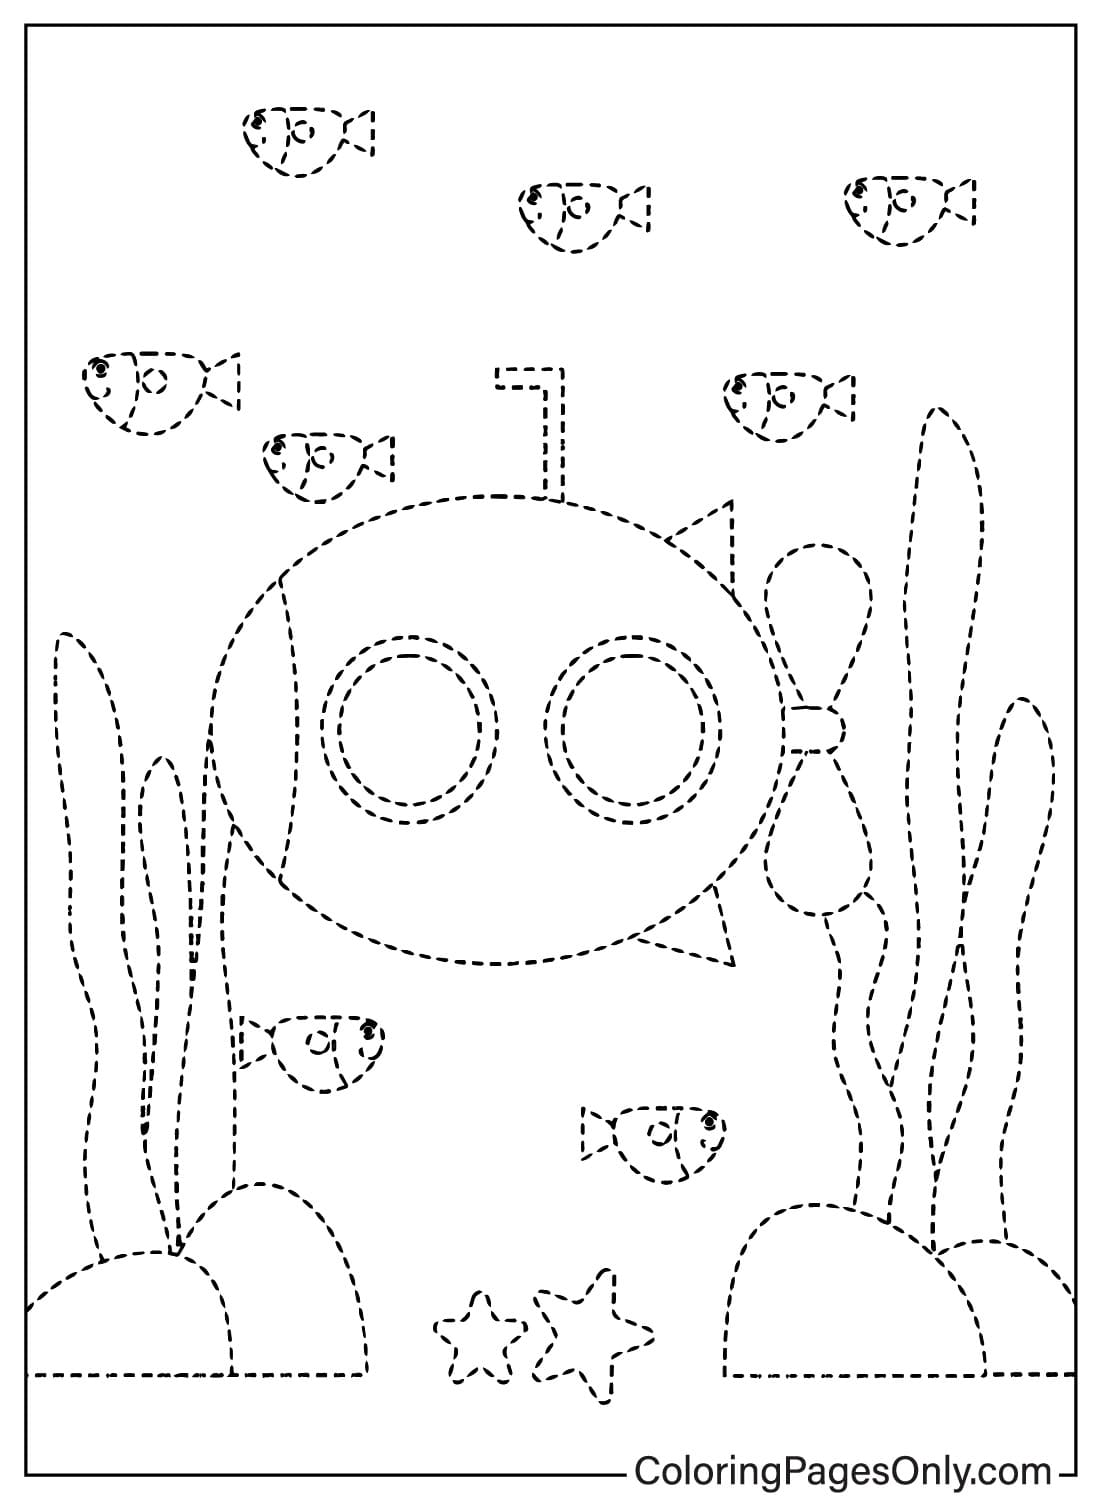 Tracing Coloring Page Book from Tracing